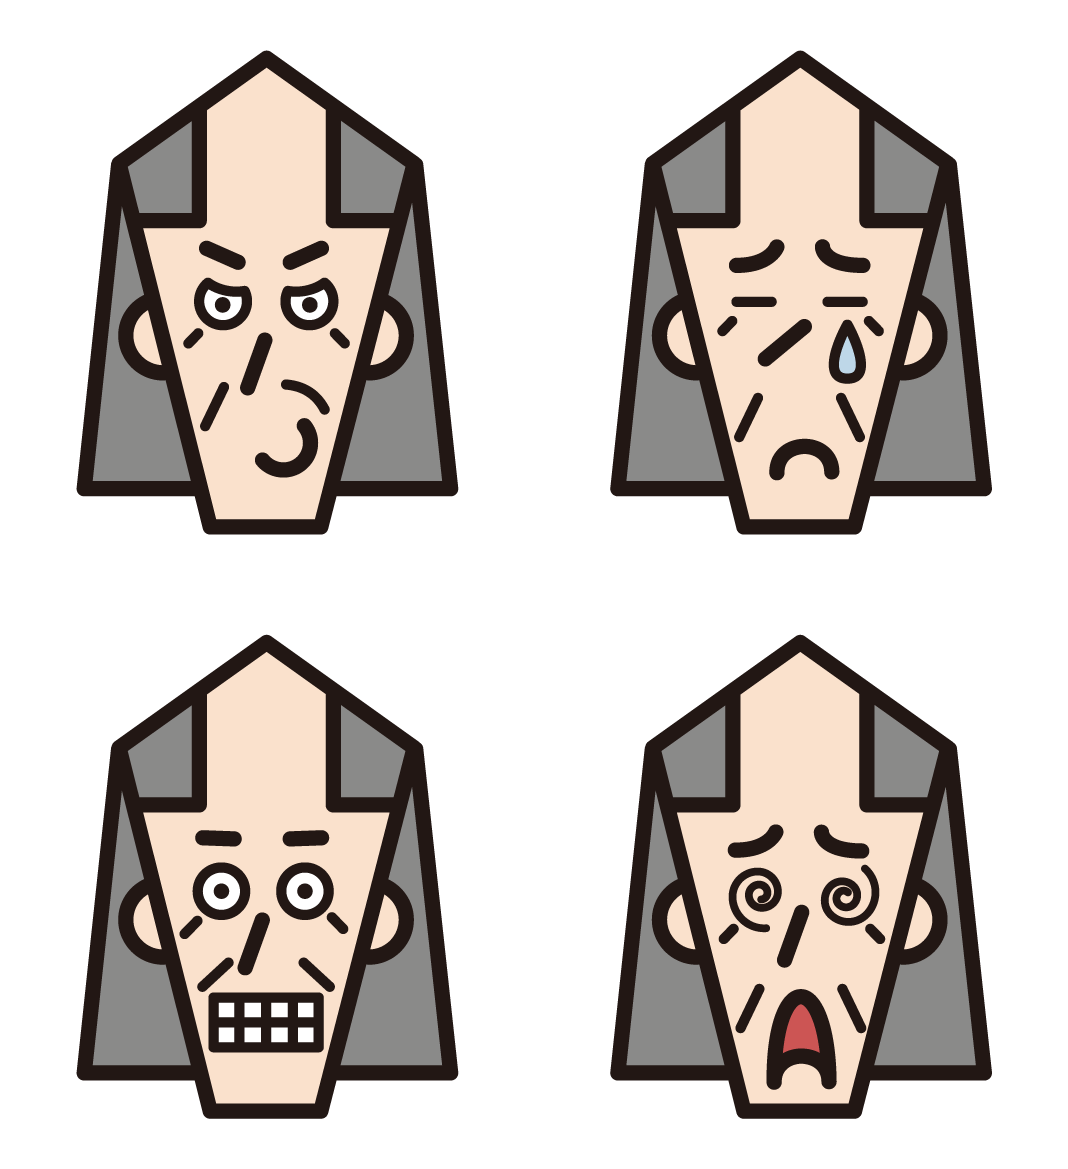 3 illustrations of the various facial expressions (long hair) of the grandfather